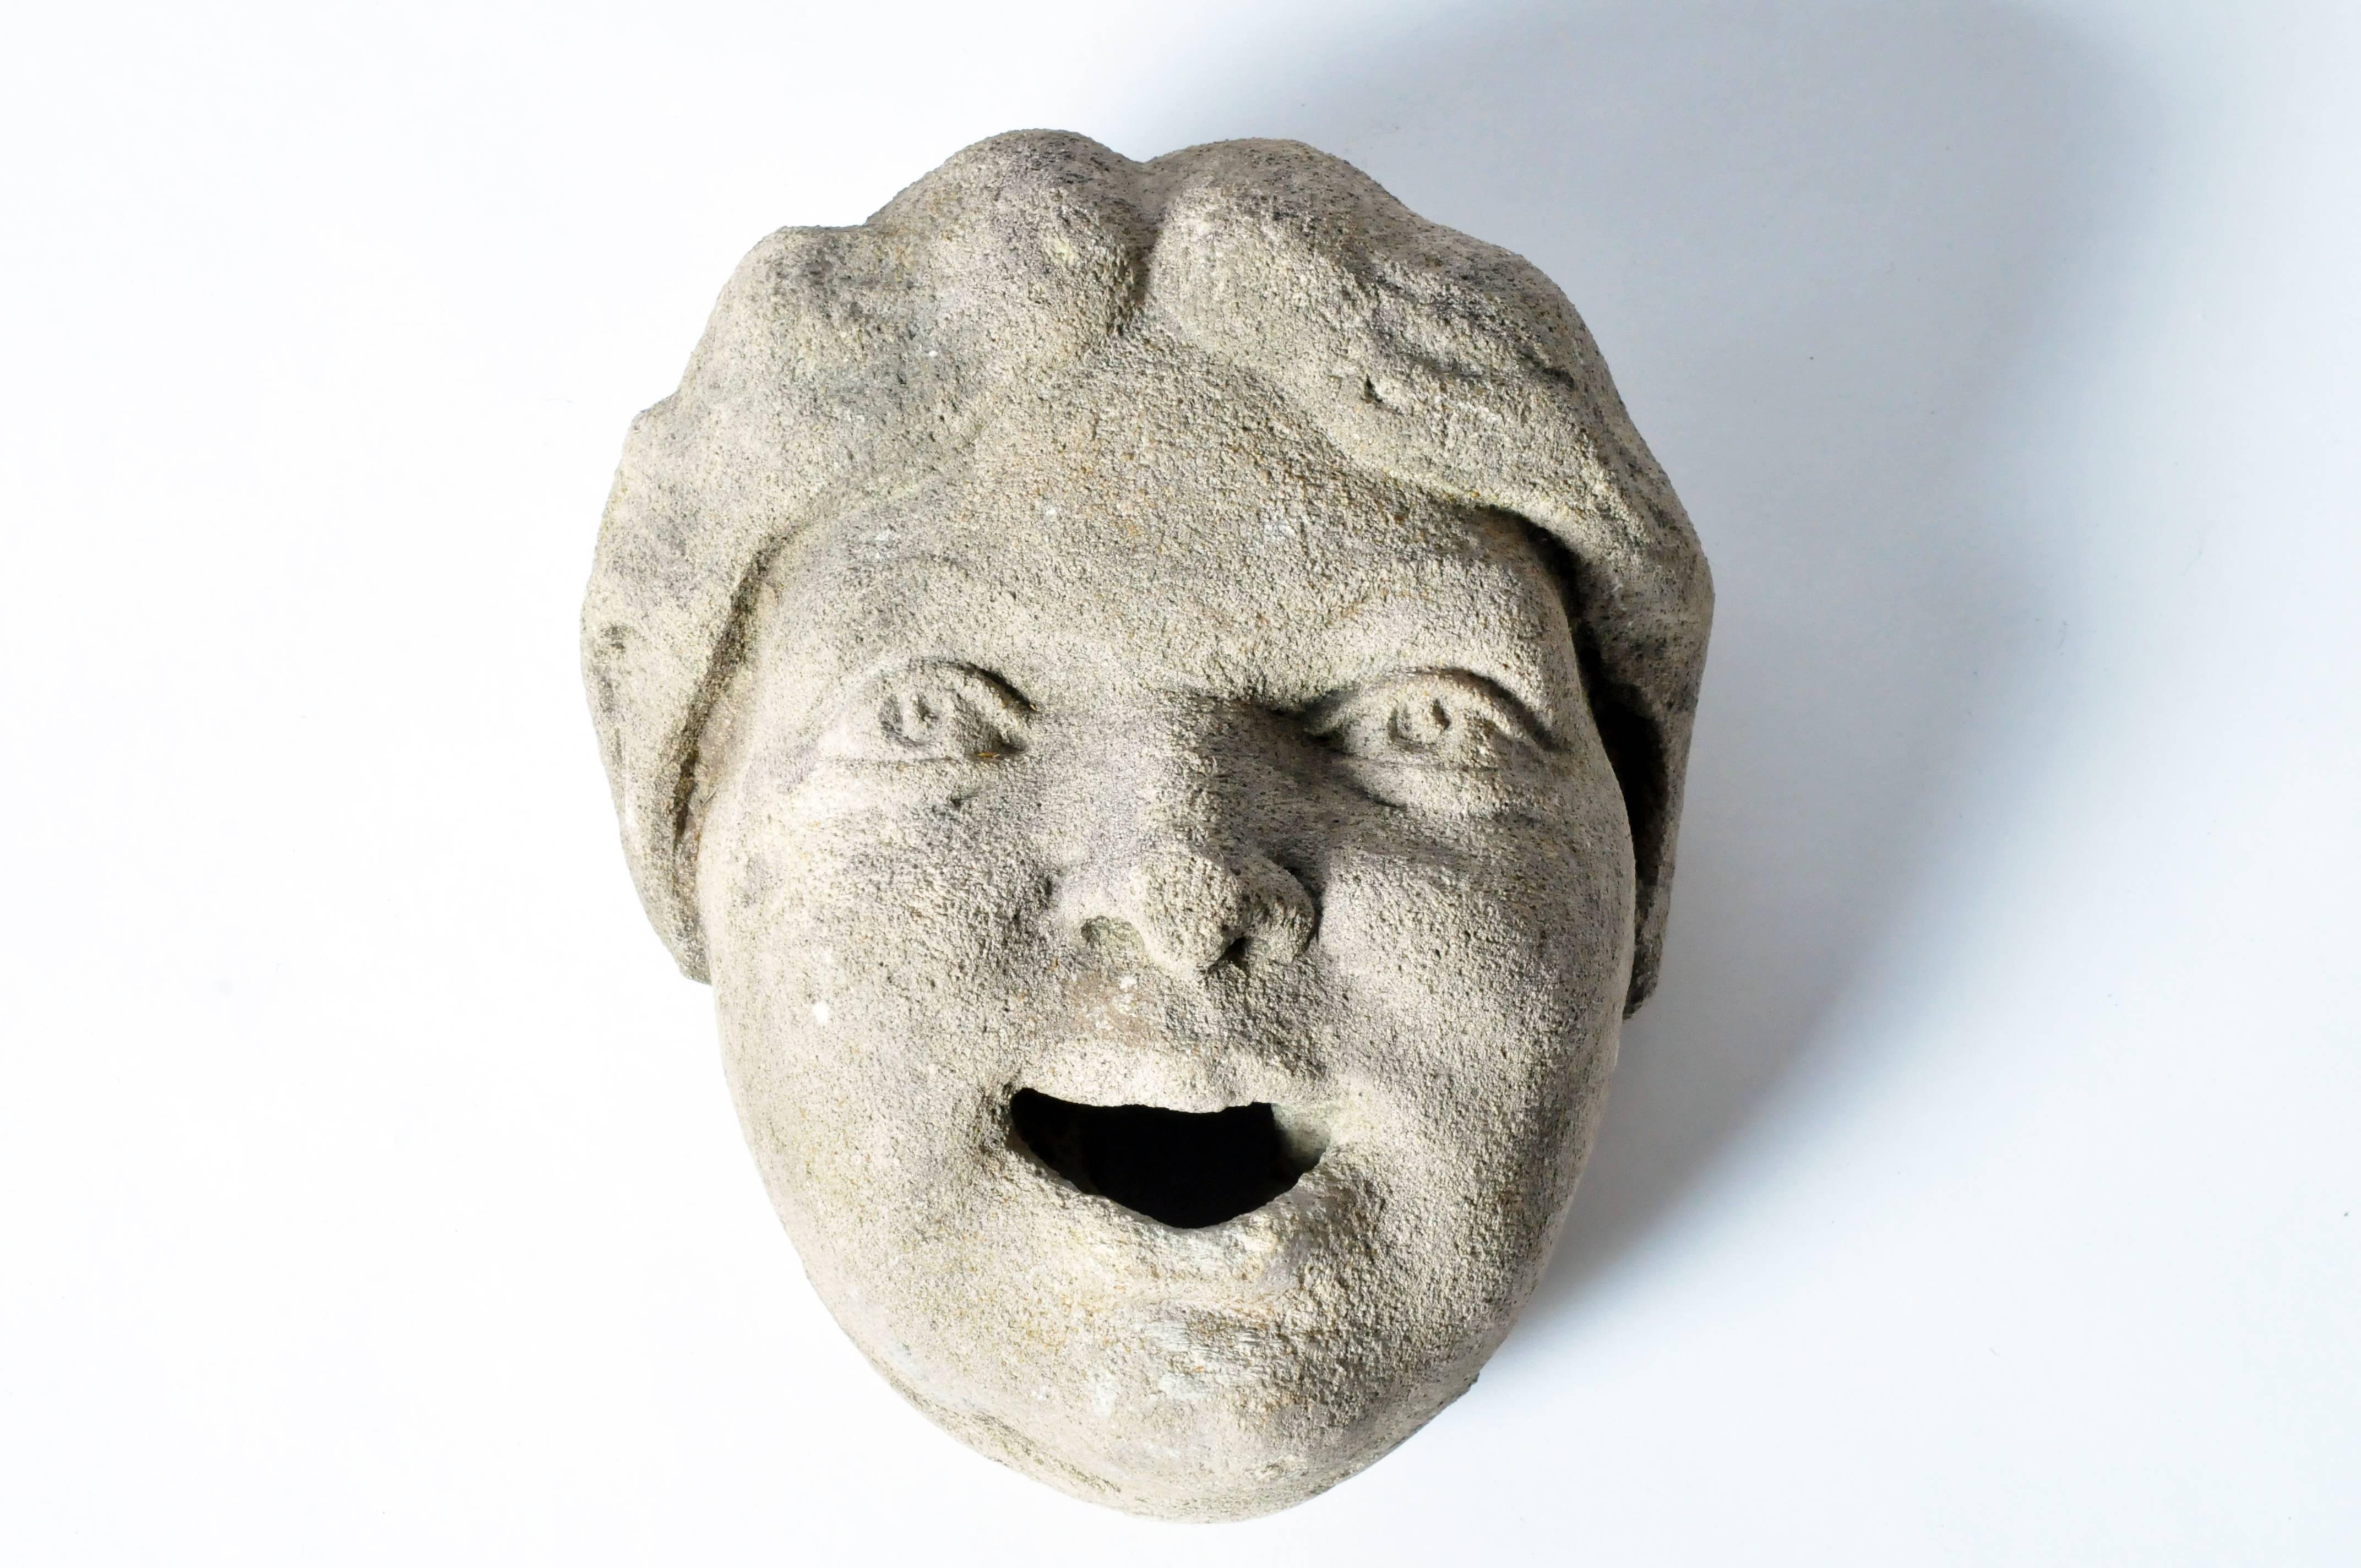 A remnant salvaged from a wall fountain, the face is likely that of a young boy. He is depicted laughing, mouth slightly open with full cheeks and a head of wavy hair.